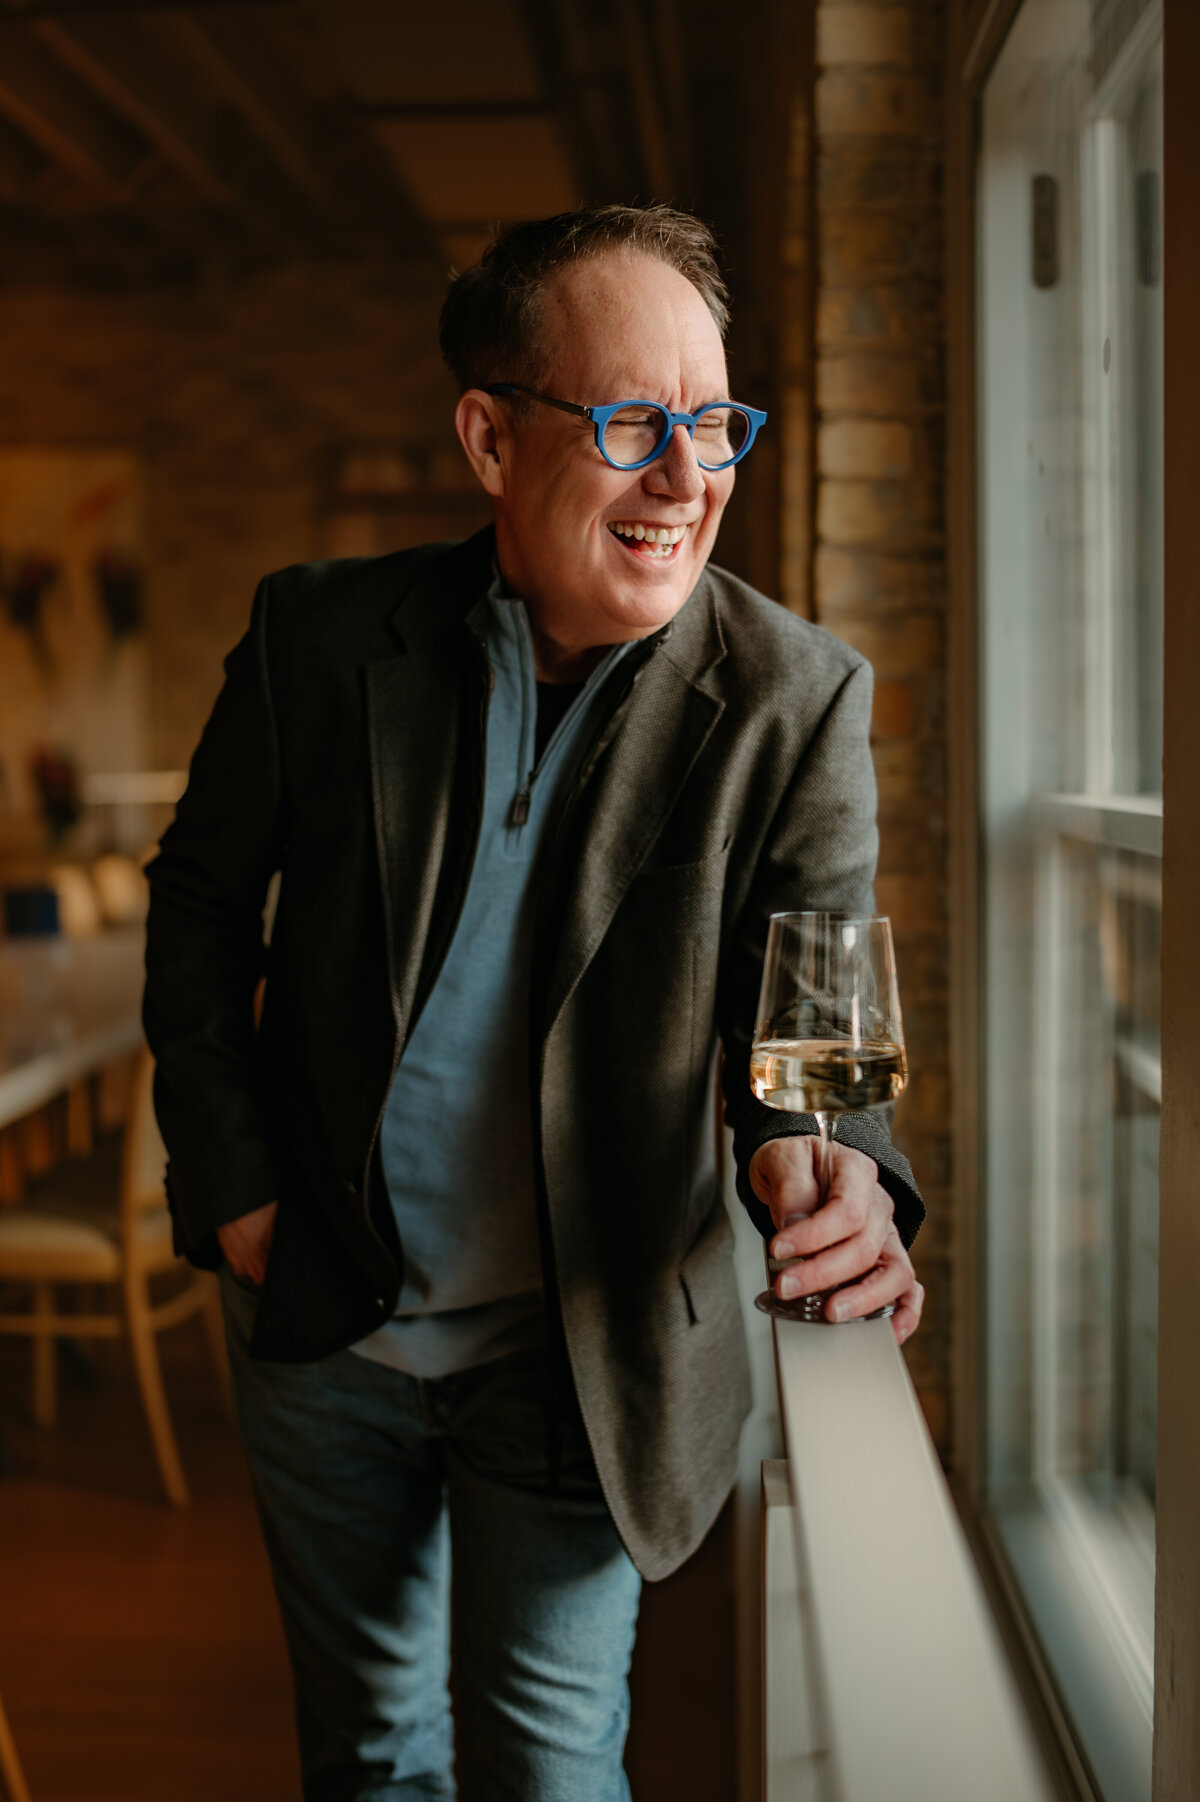 Minneapolis dating profile picture for dating apps. Man standing next to window laughing holding a glass of wine